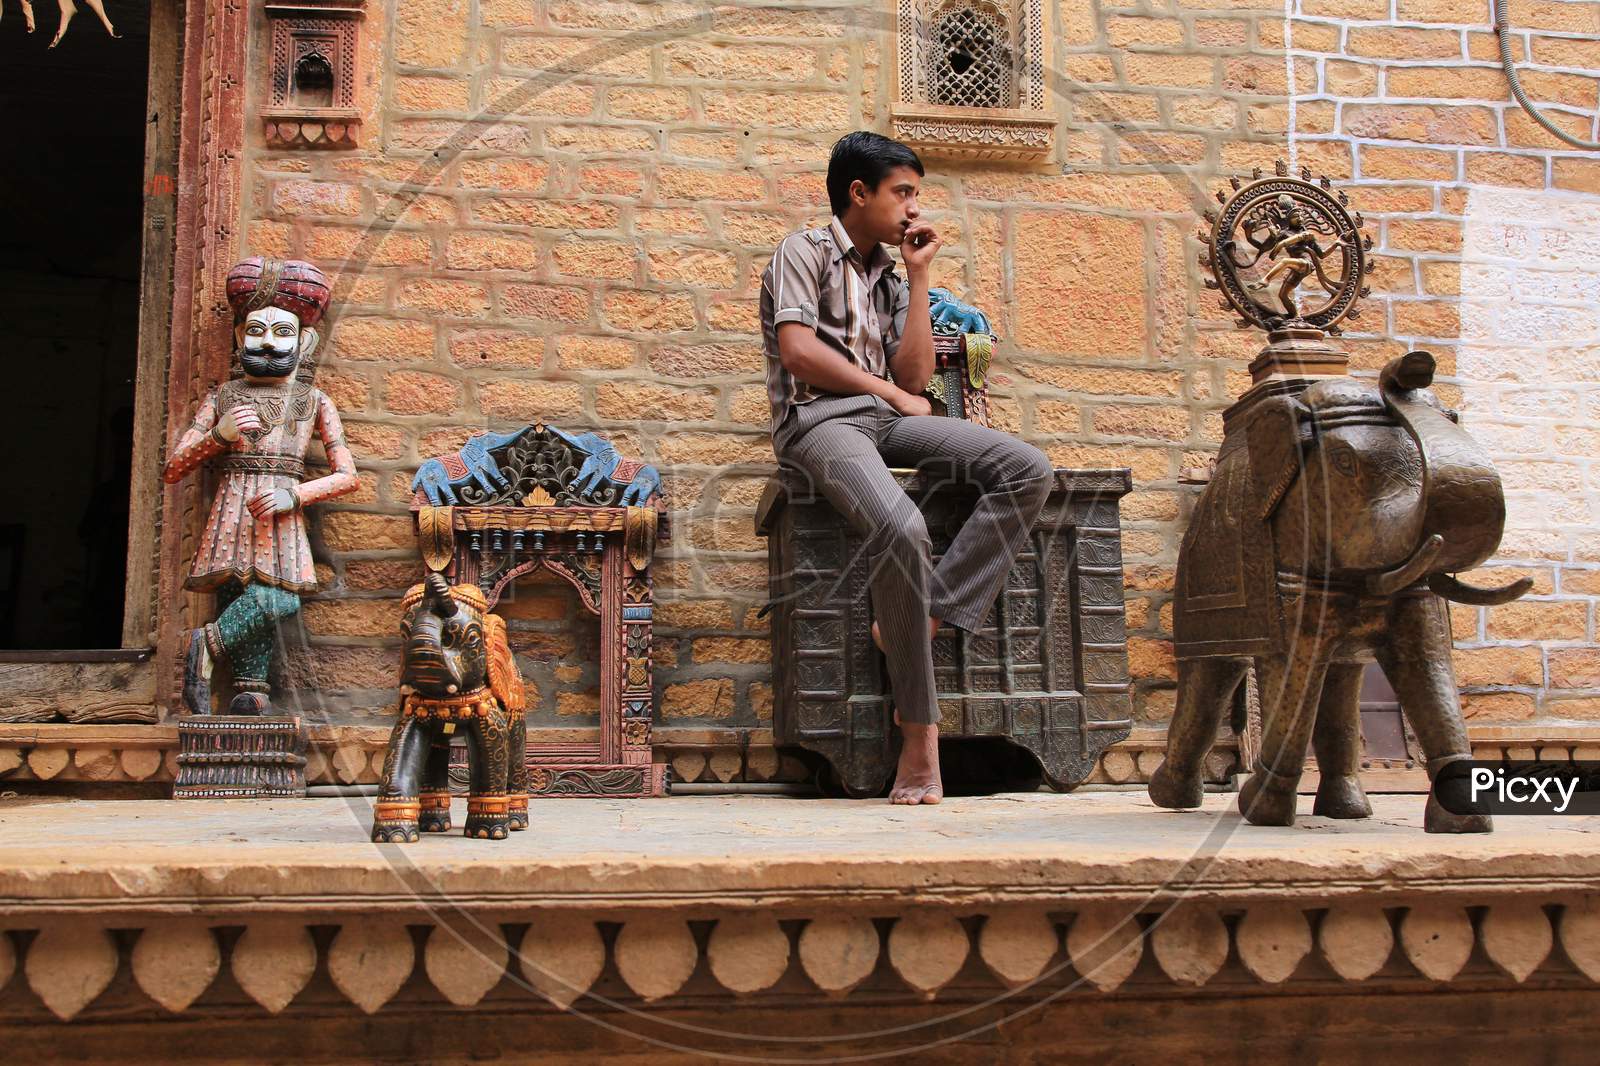 A Rajasthani Boy Sitting At an  Road Side Antique Vendors Stall In Jaisalmer , Rajasthan